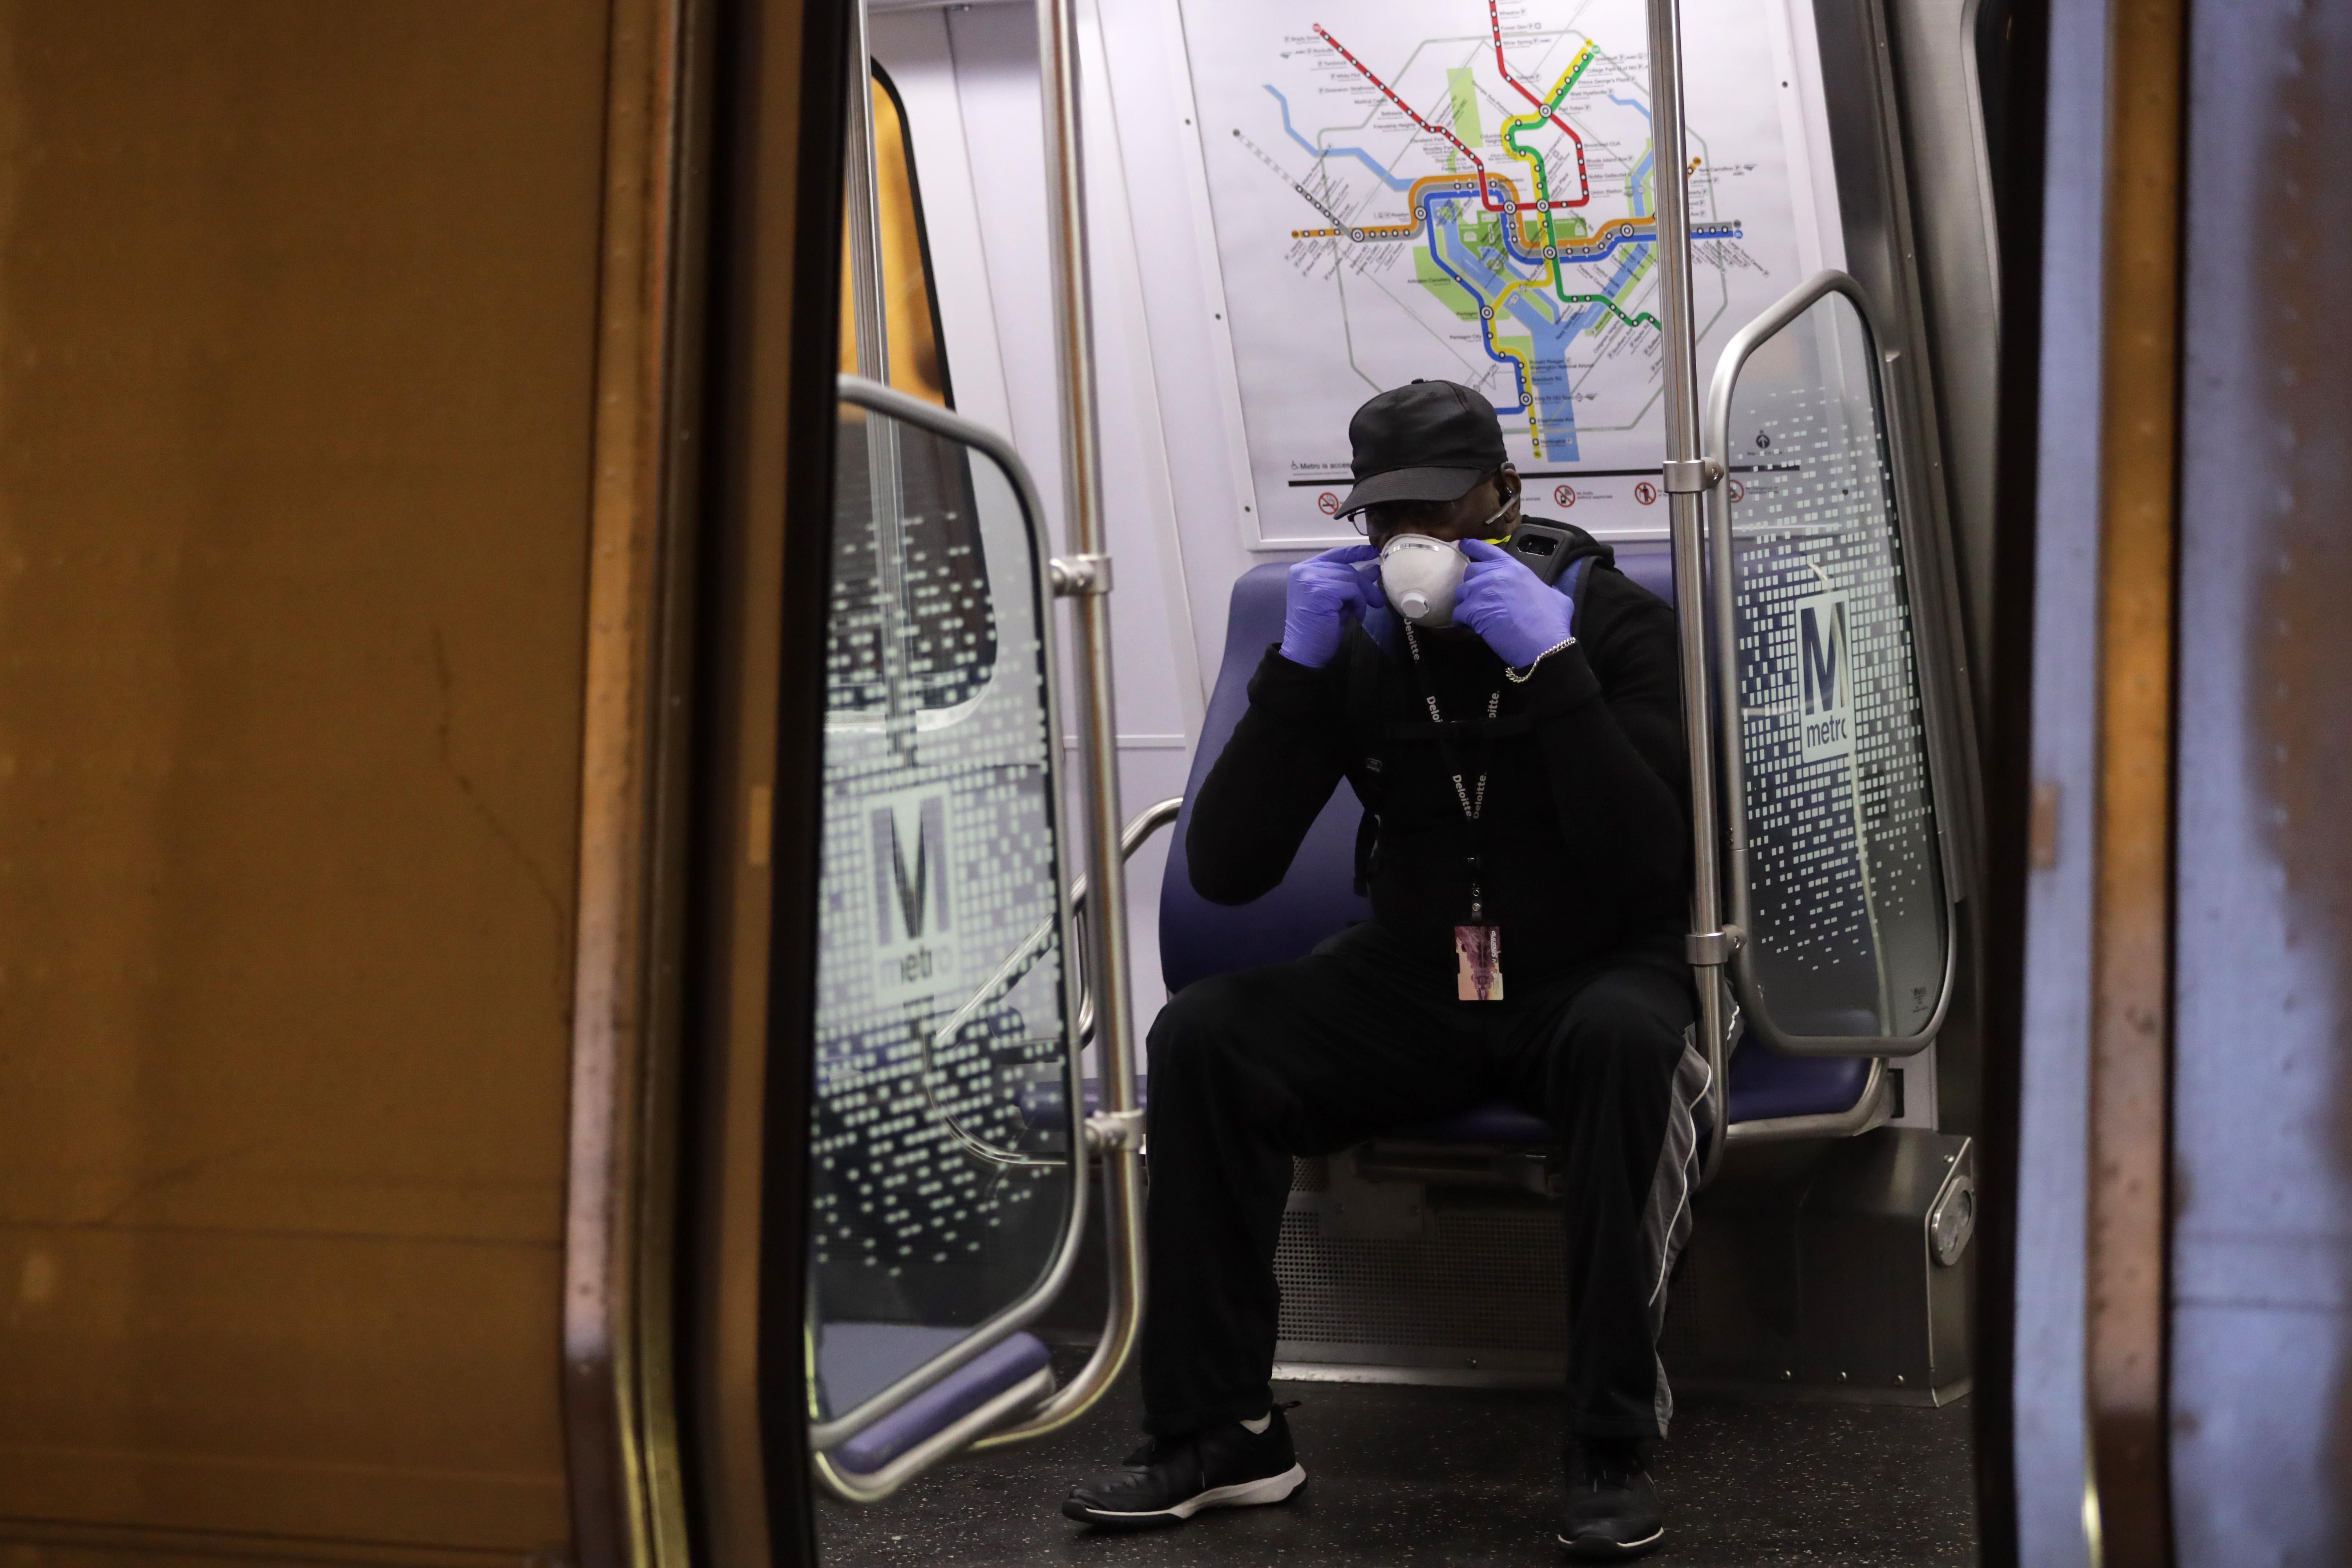 A passenger adjusts his mask in a Metro train car.